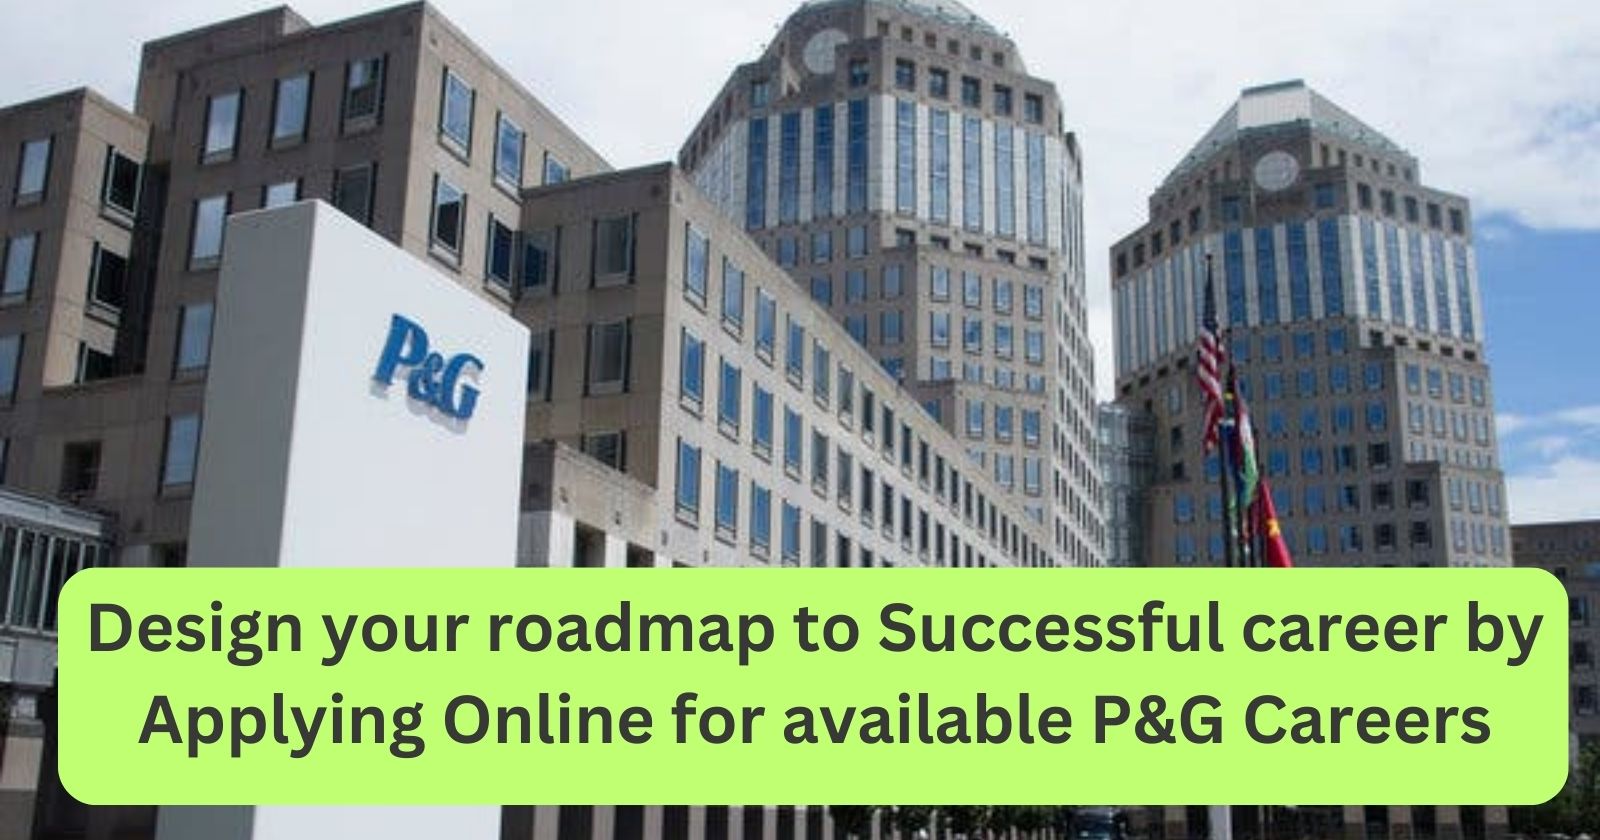 Design your roadmap to Successful career by Applying Online for available P&G Careers